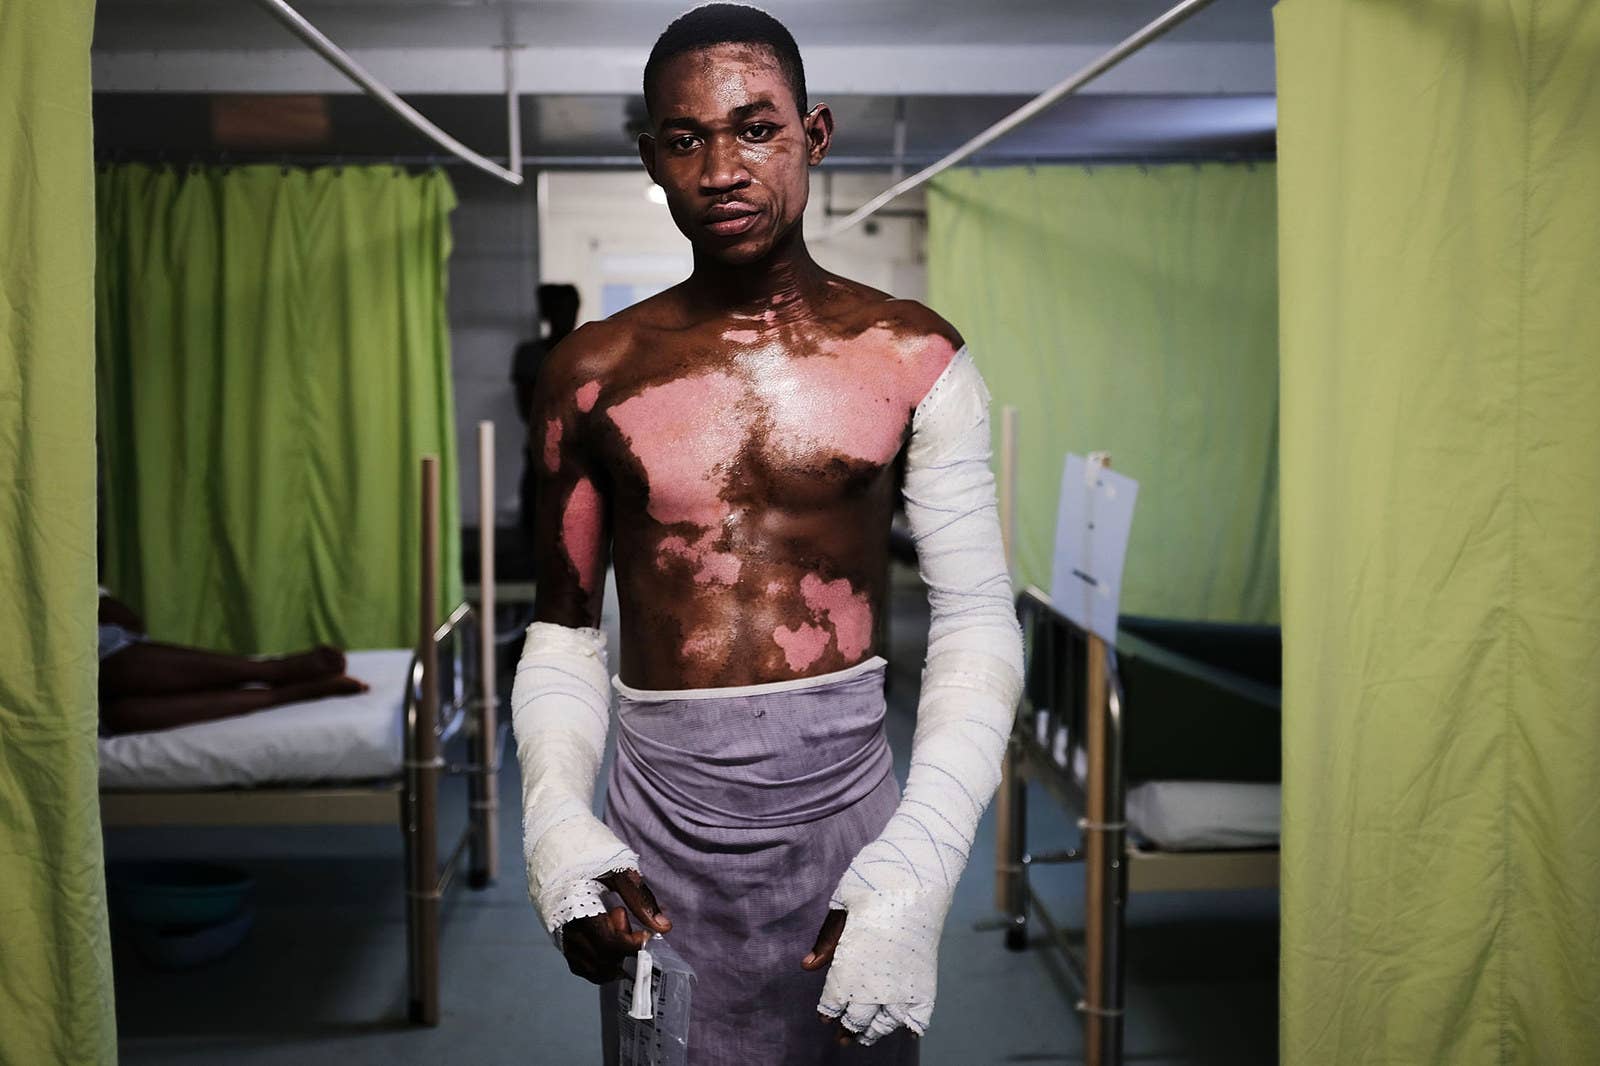 Shnider Avril, who was severely burned by an explosion from a propane tank is treated in the Doctors Without Borders (MSF) Drouillard hospital for burn patients on Feb. 12, in Port-au-Prince, Haiti. The hospital has the first dedicated burn unit in Haiti.